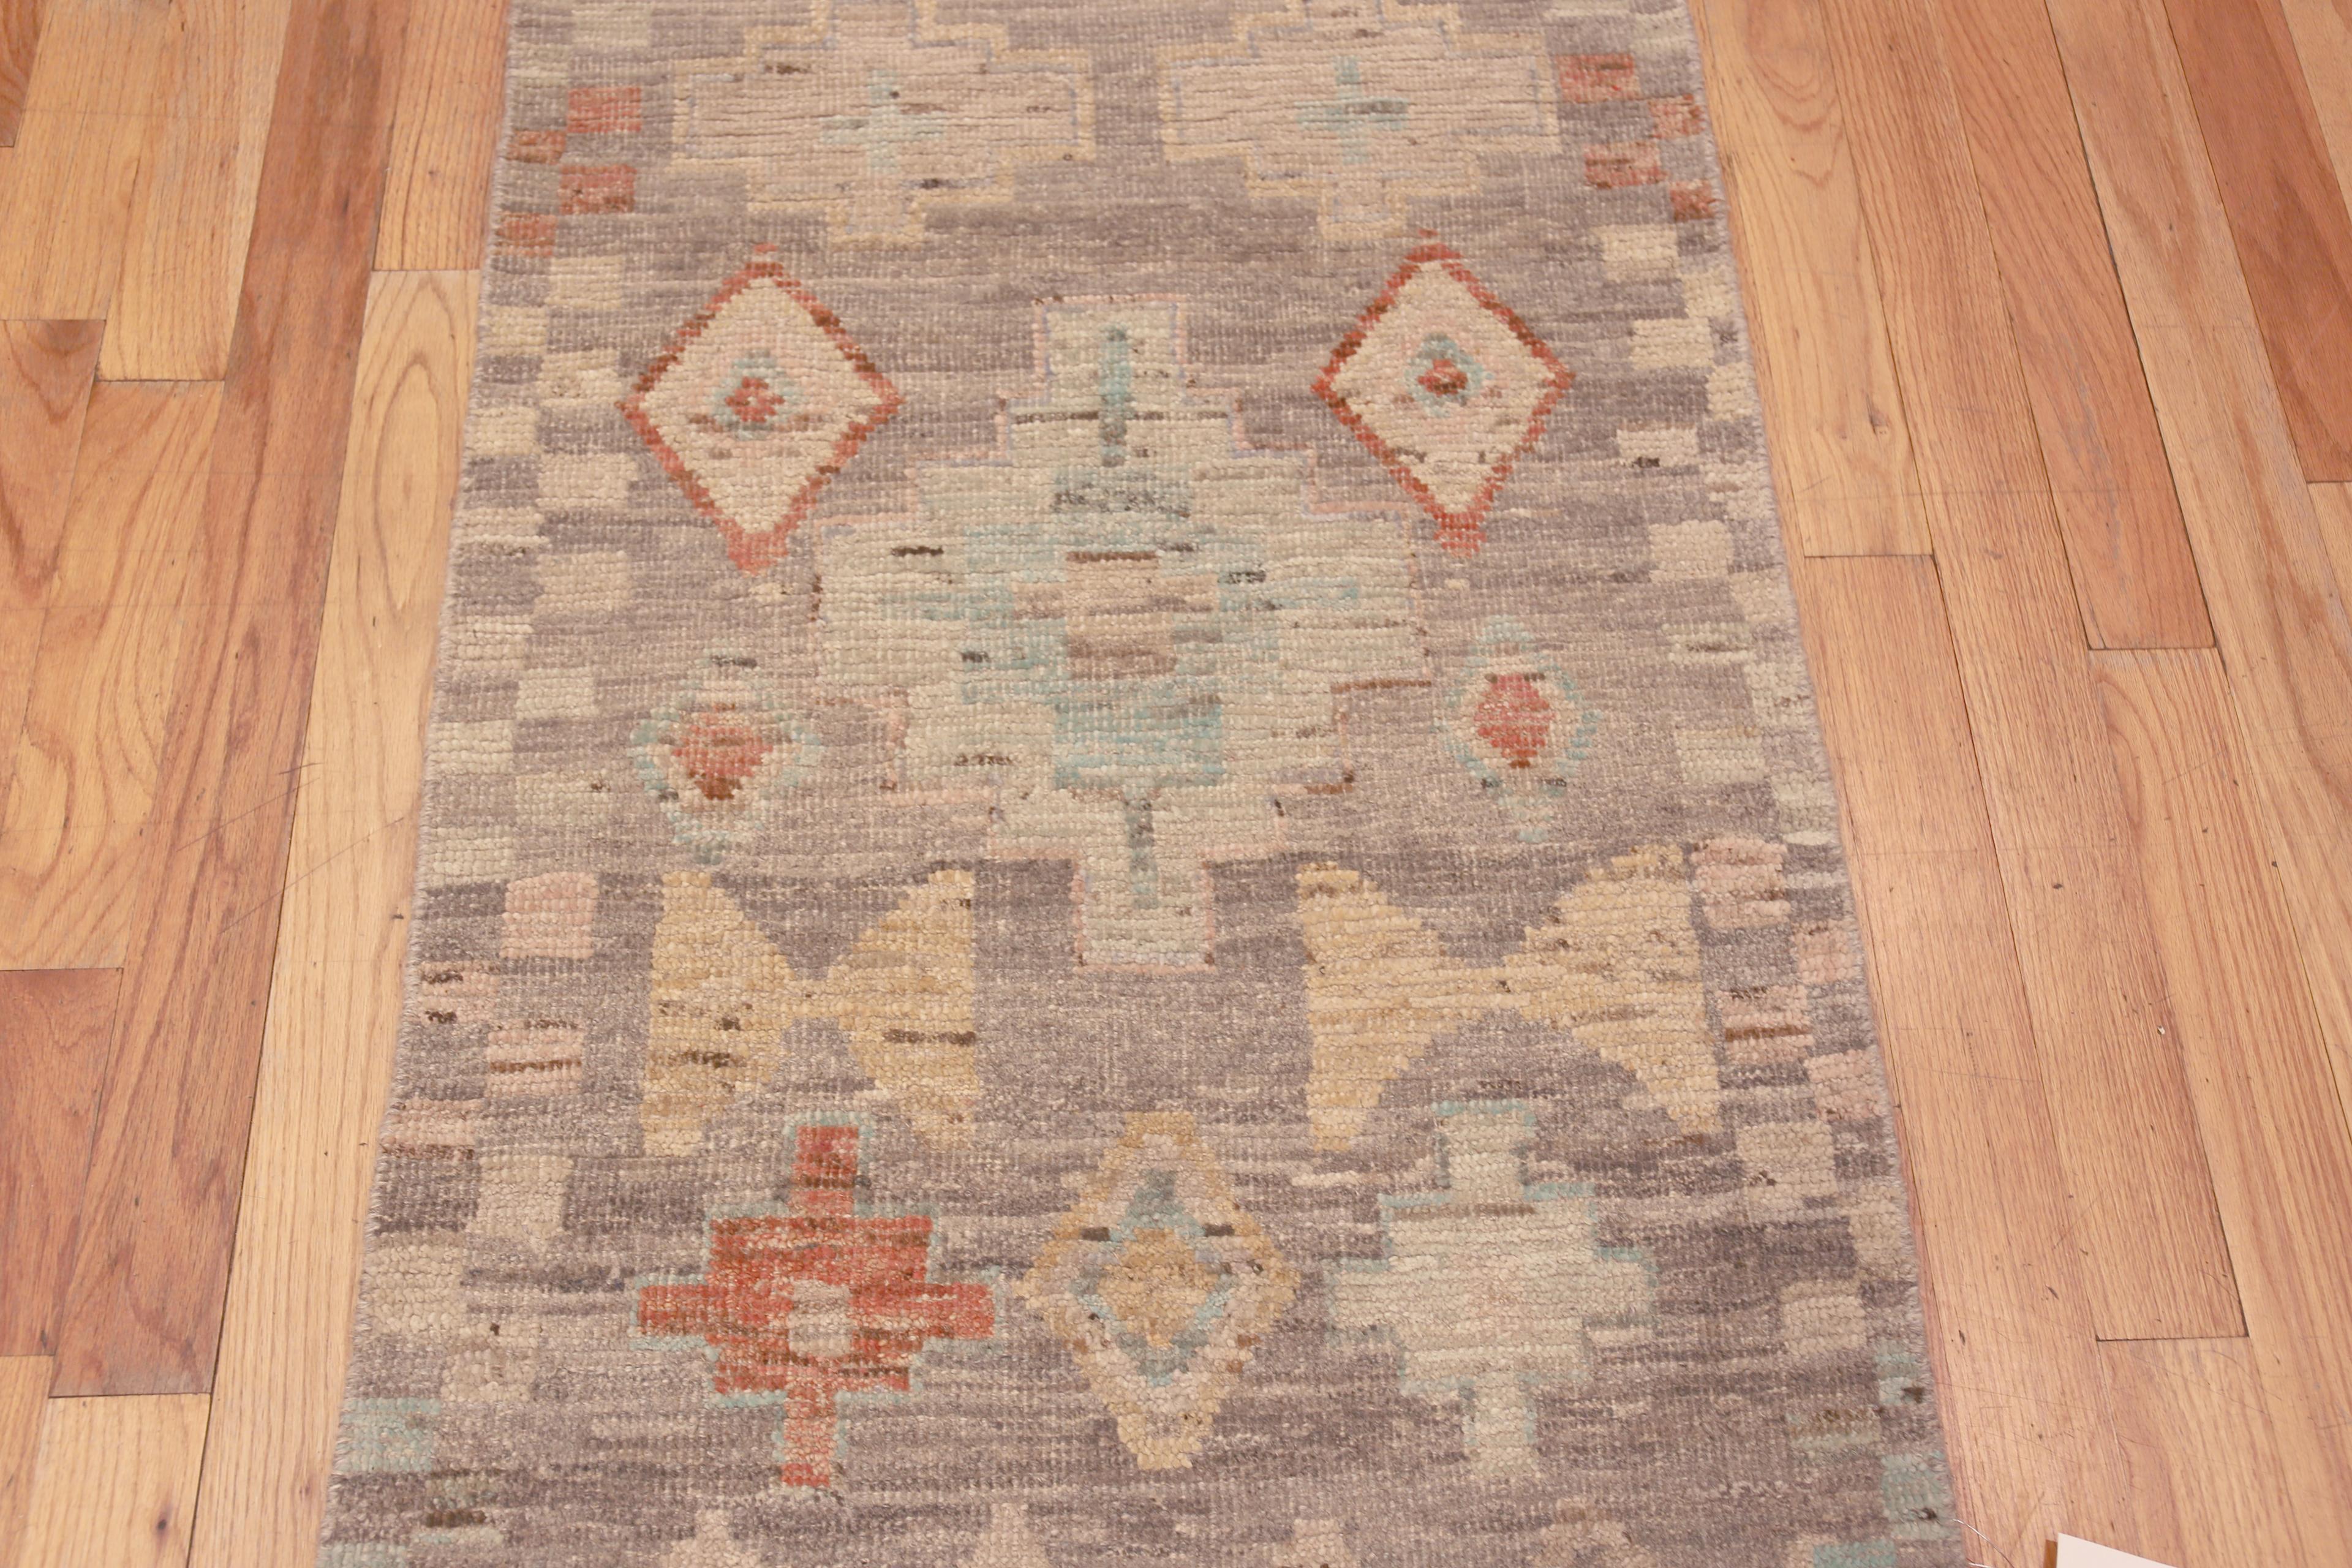 Central Asian Nazmiyal Collection Rustic Tribal Design Hallway Runner Rug 2'8